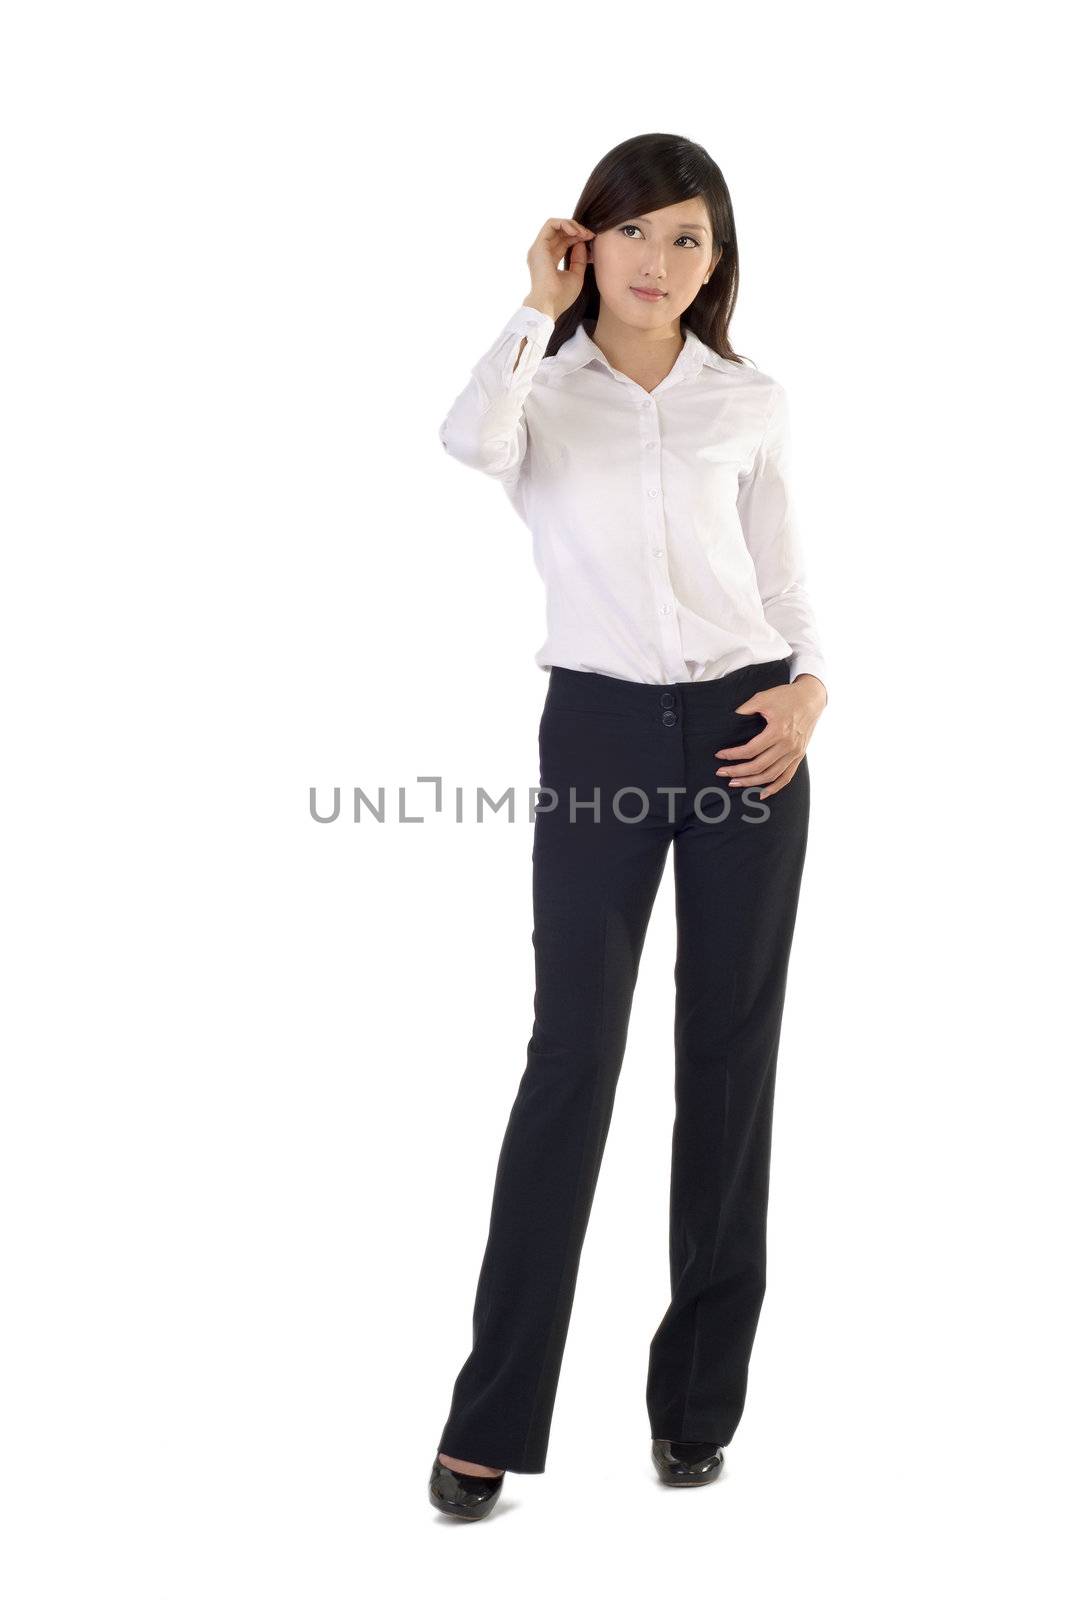 Business woman portrait of Asian on white background.